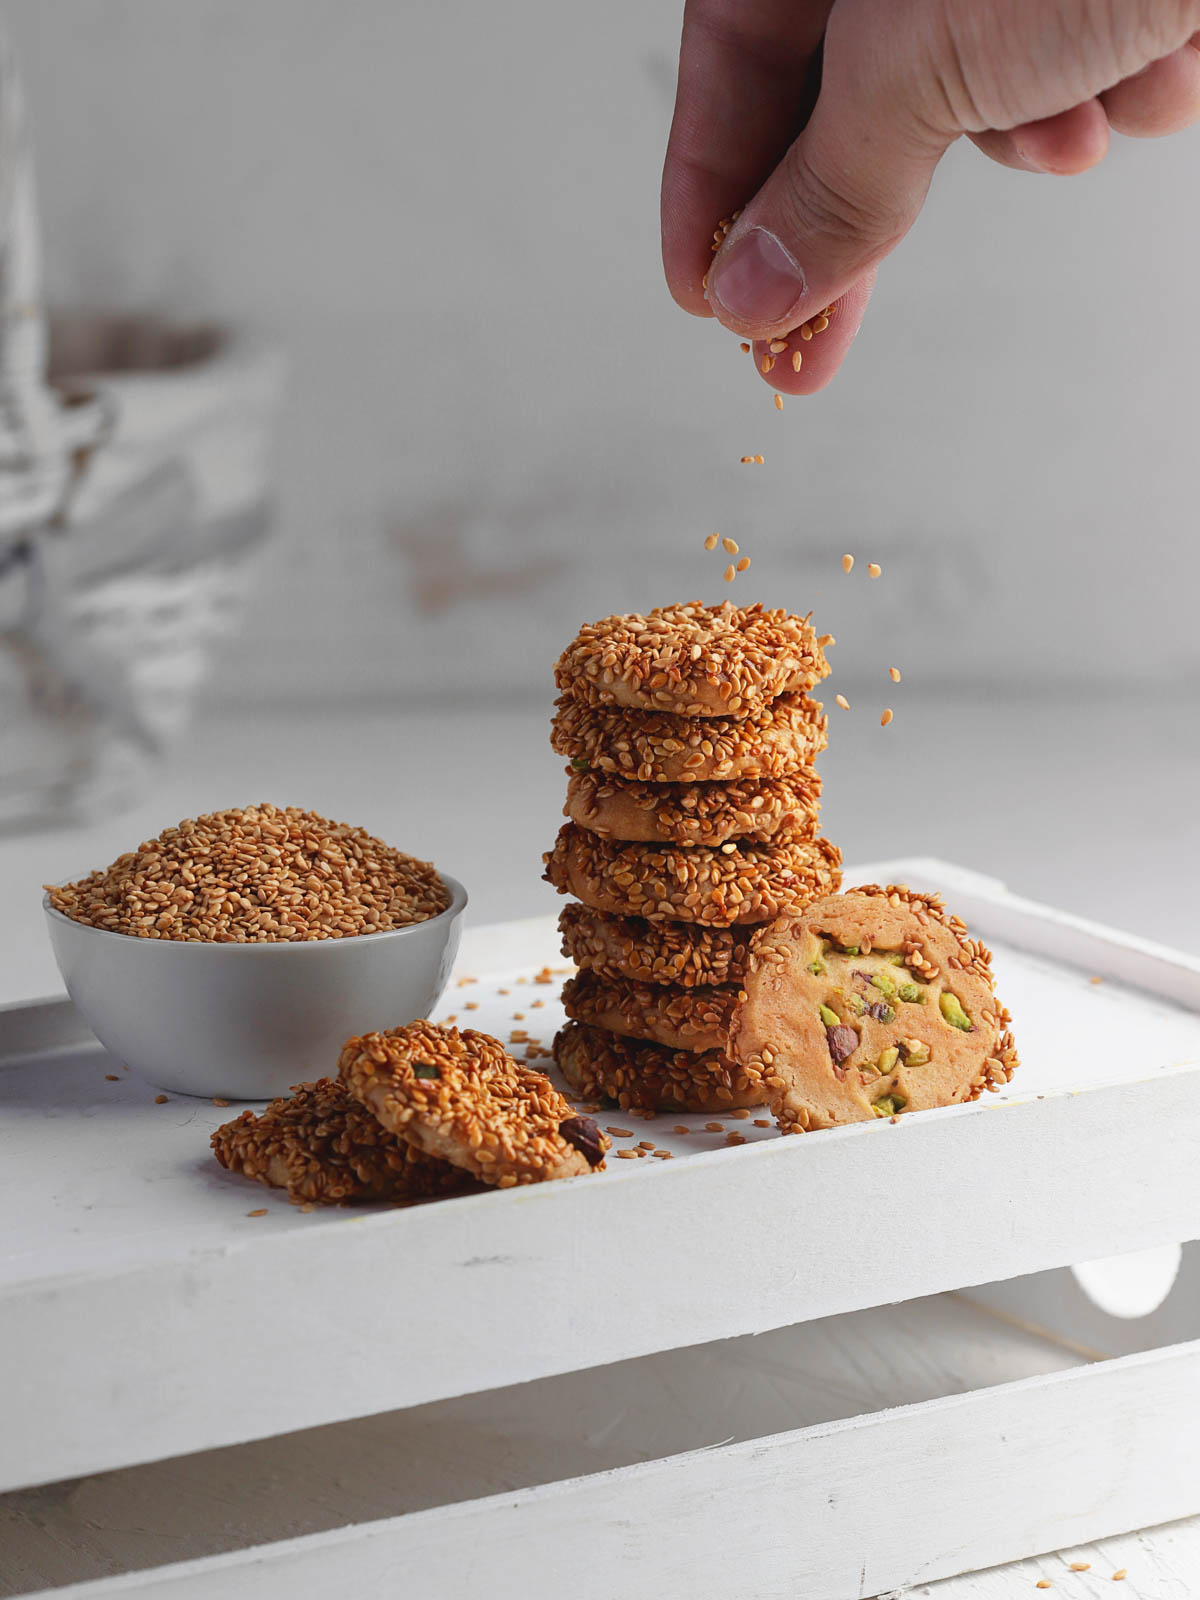 A hand sprinkling white sesame on top of sesame cookies.